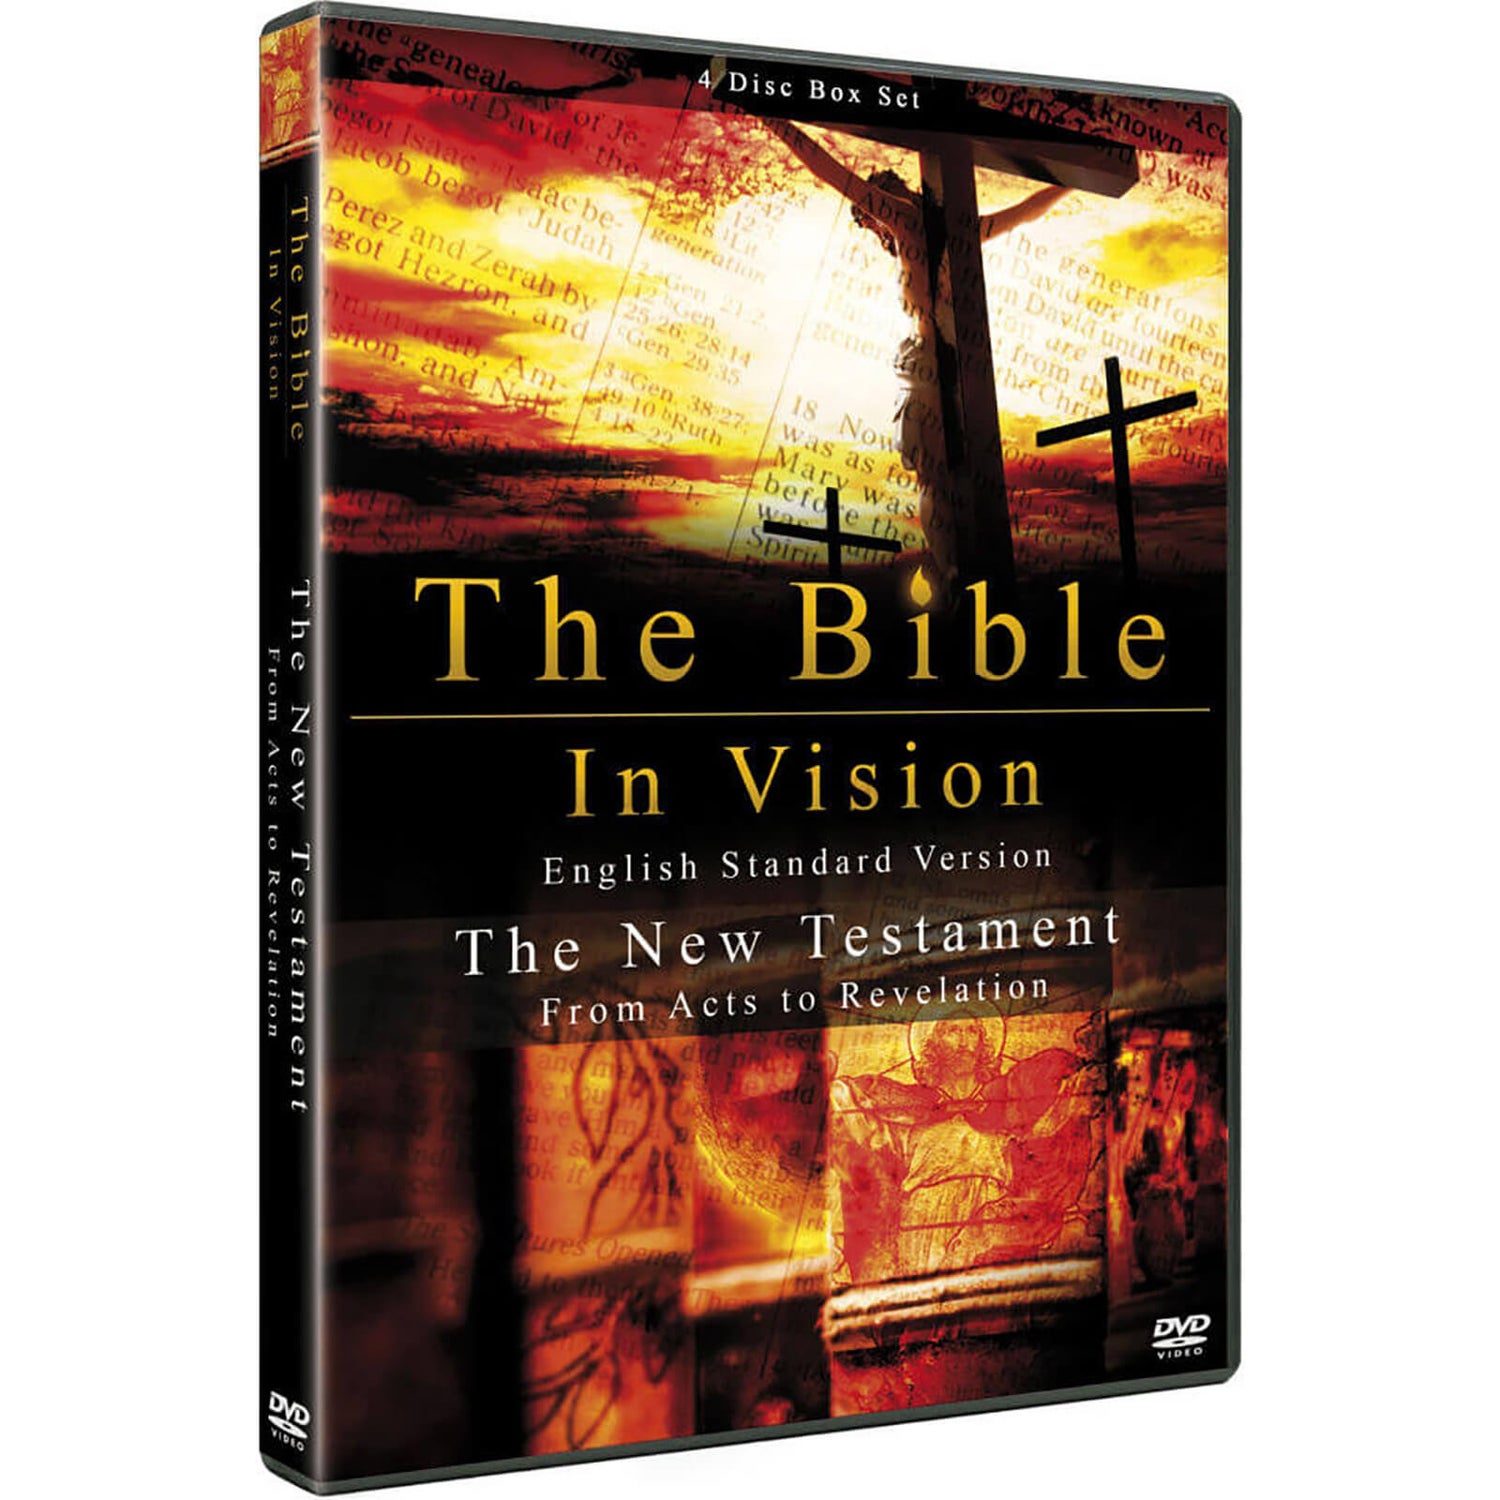 The Bible in Vision: The New Testament - From Acts to Revelation